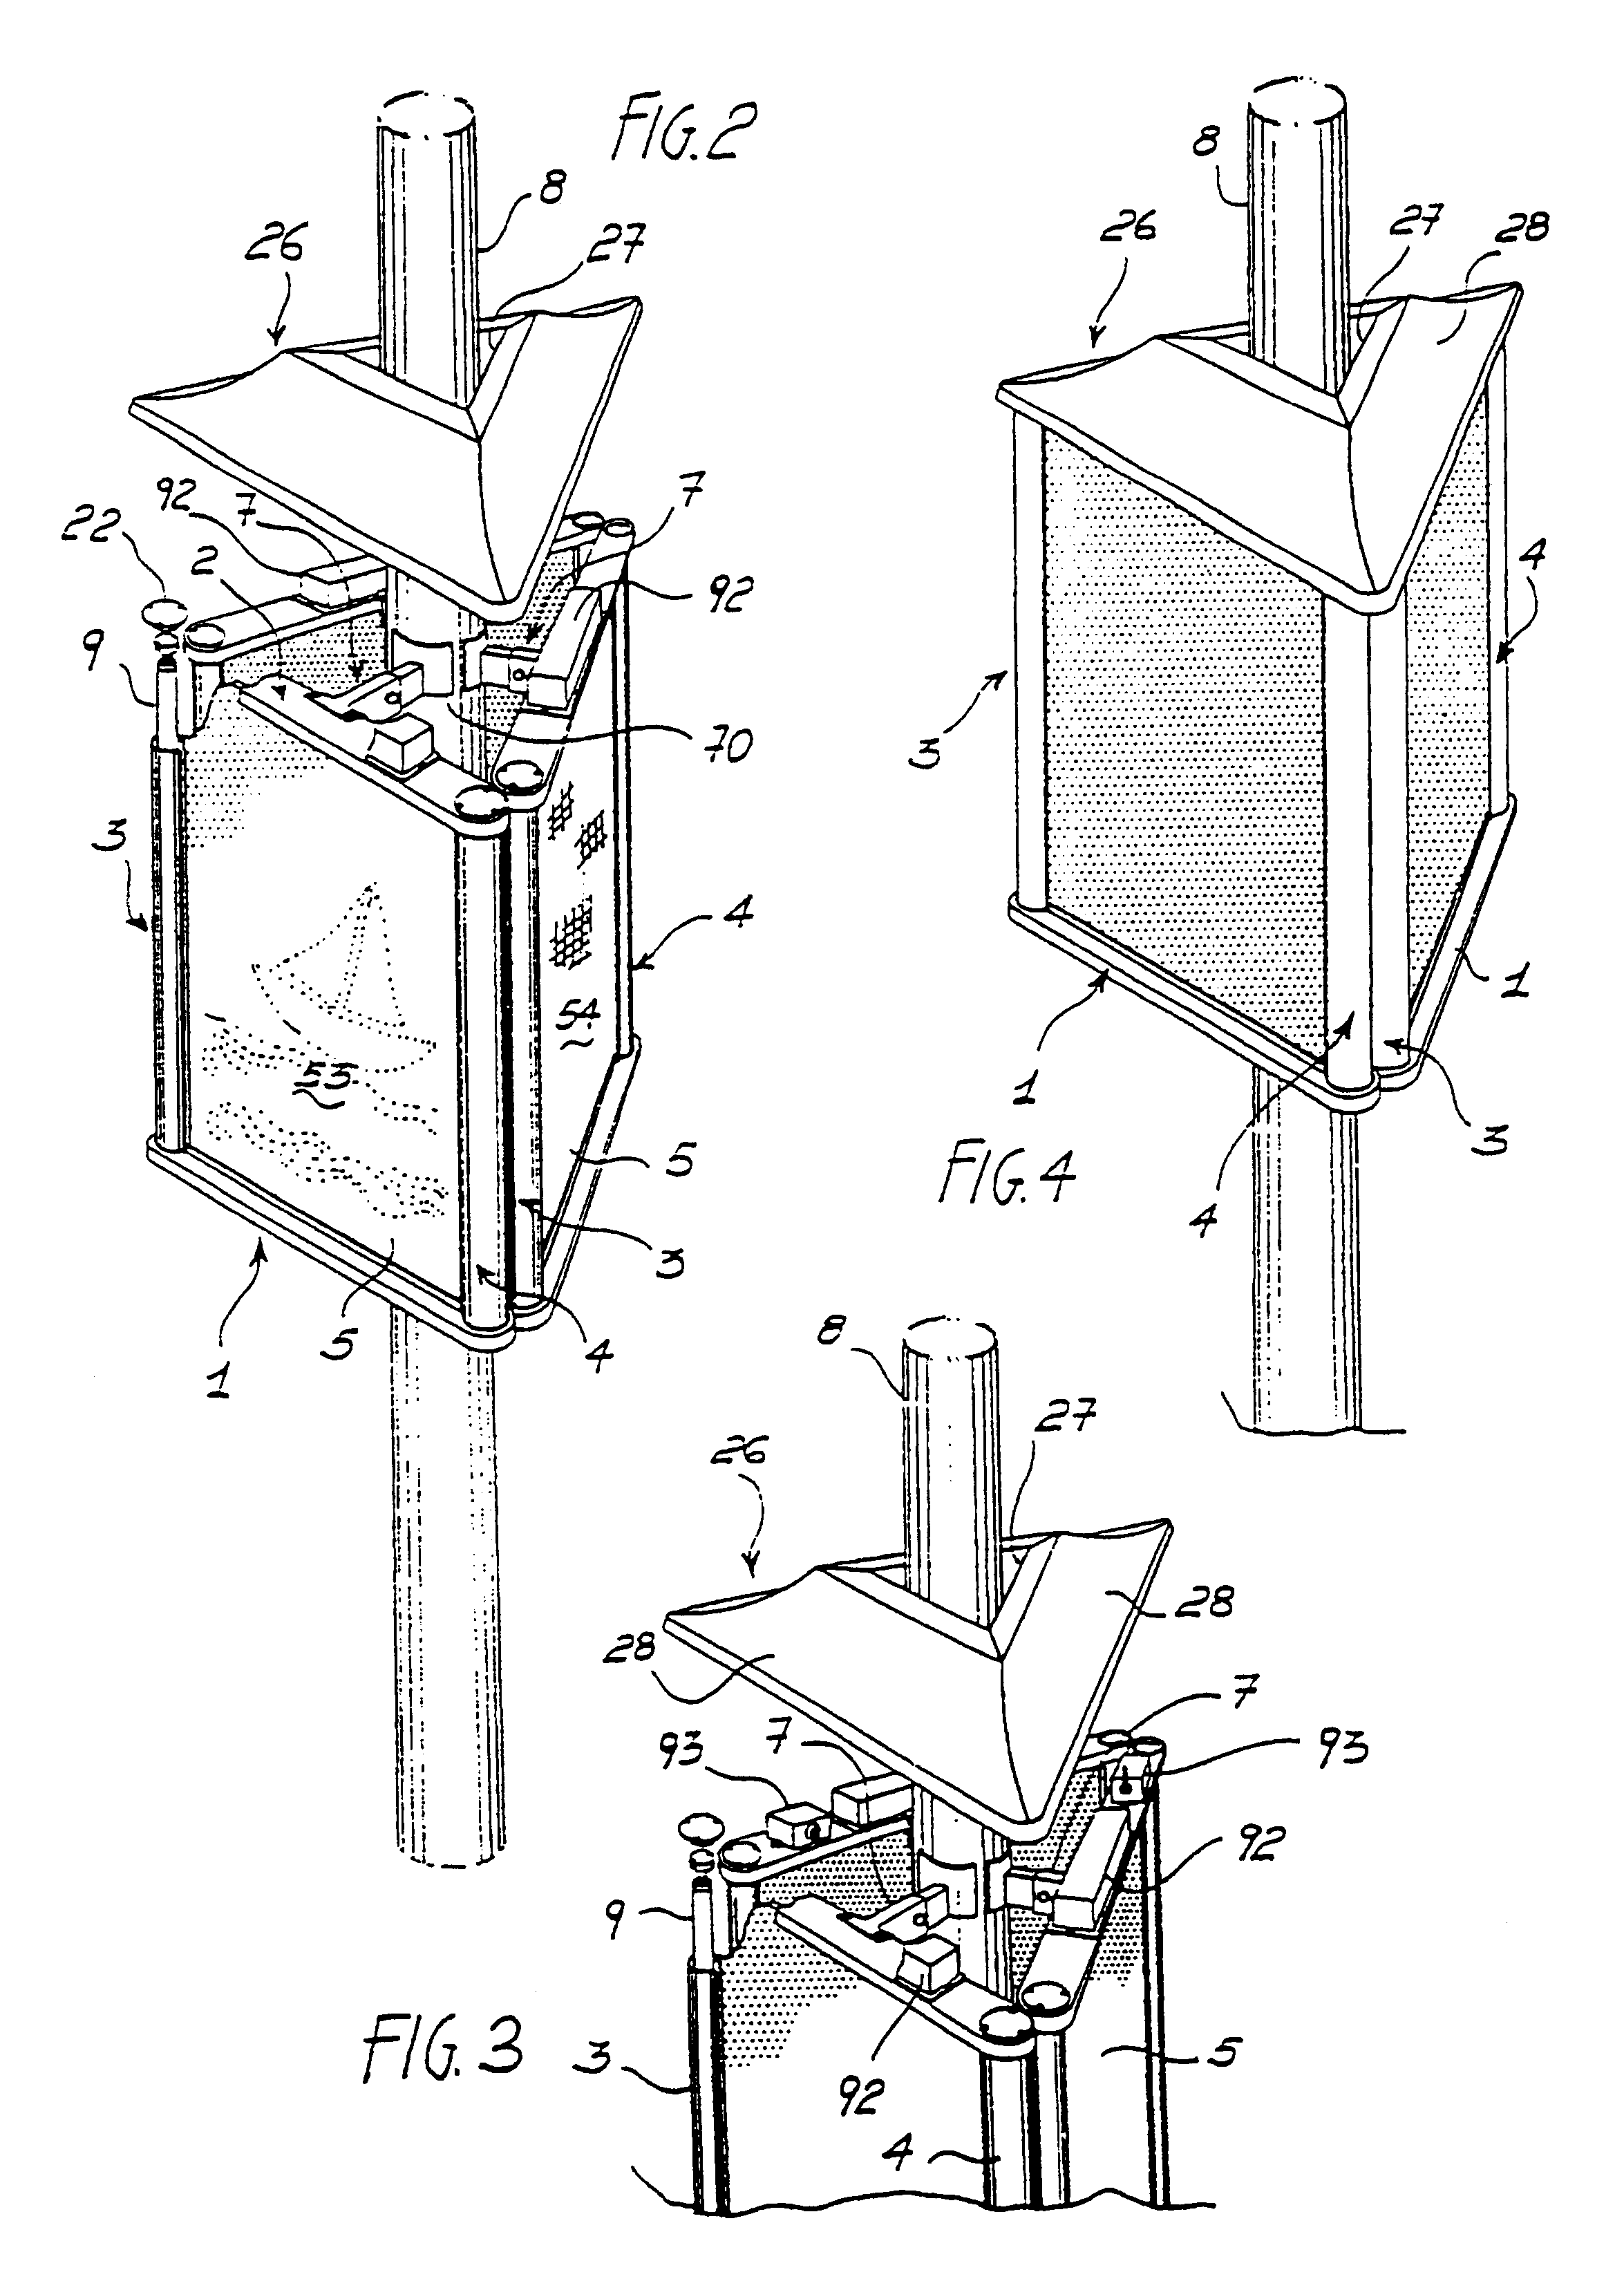 Lighted panel device able to be applied onto posts